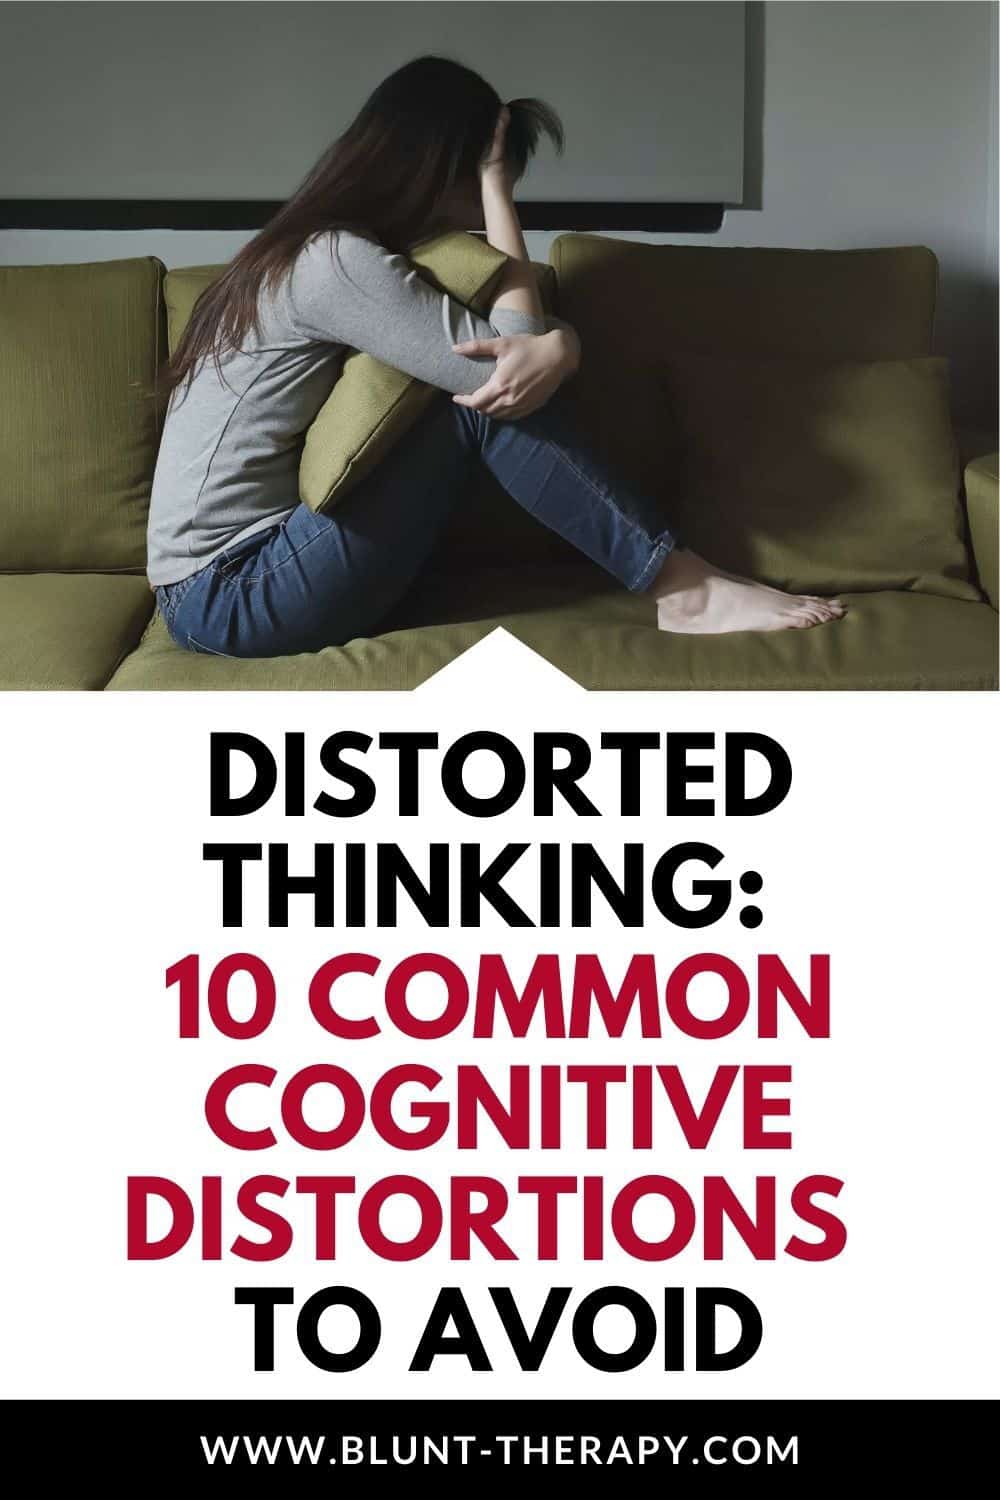 Distorted Thinking and Common Cognitive Distortions